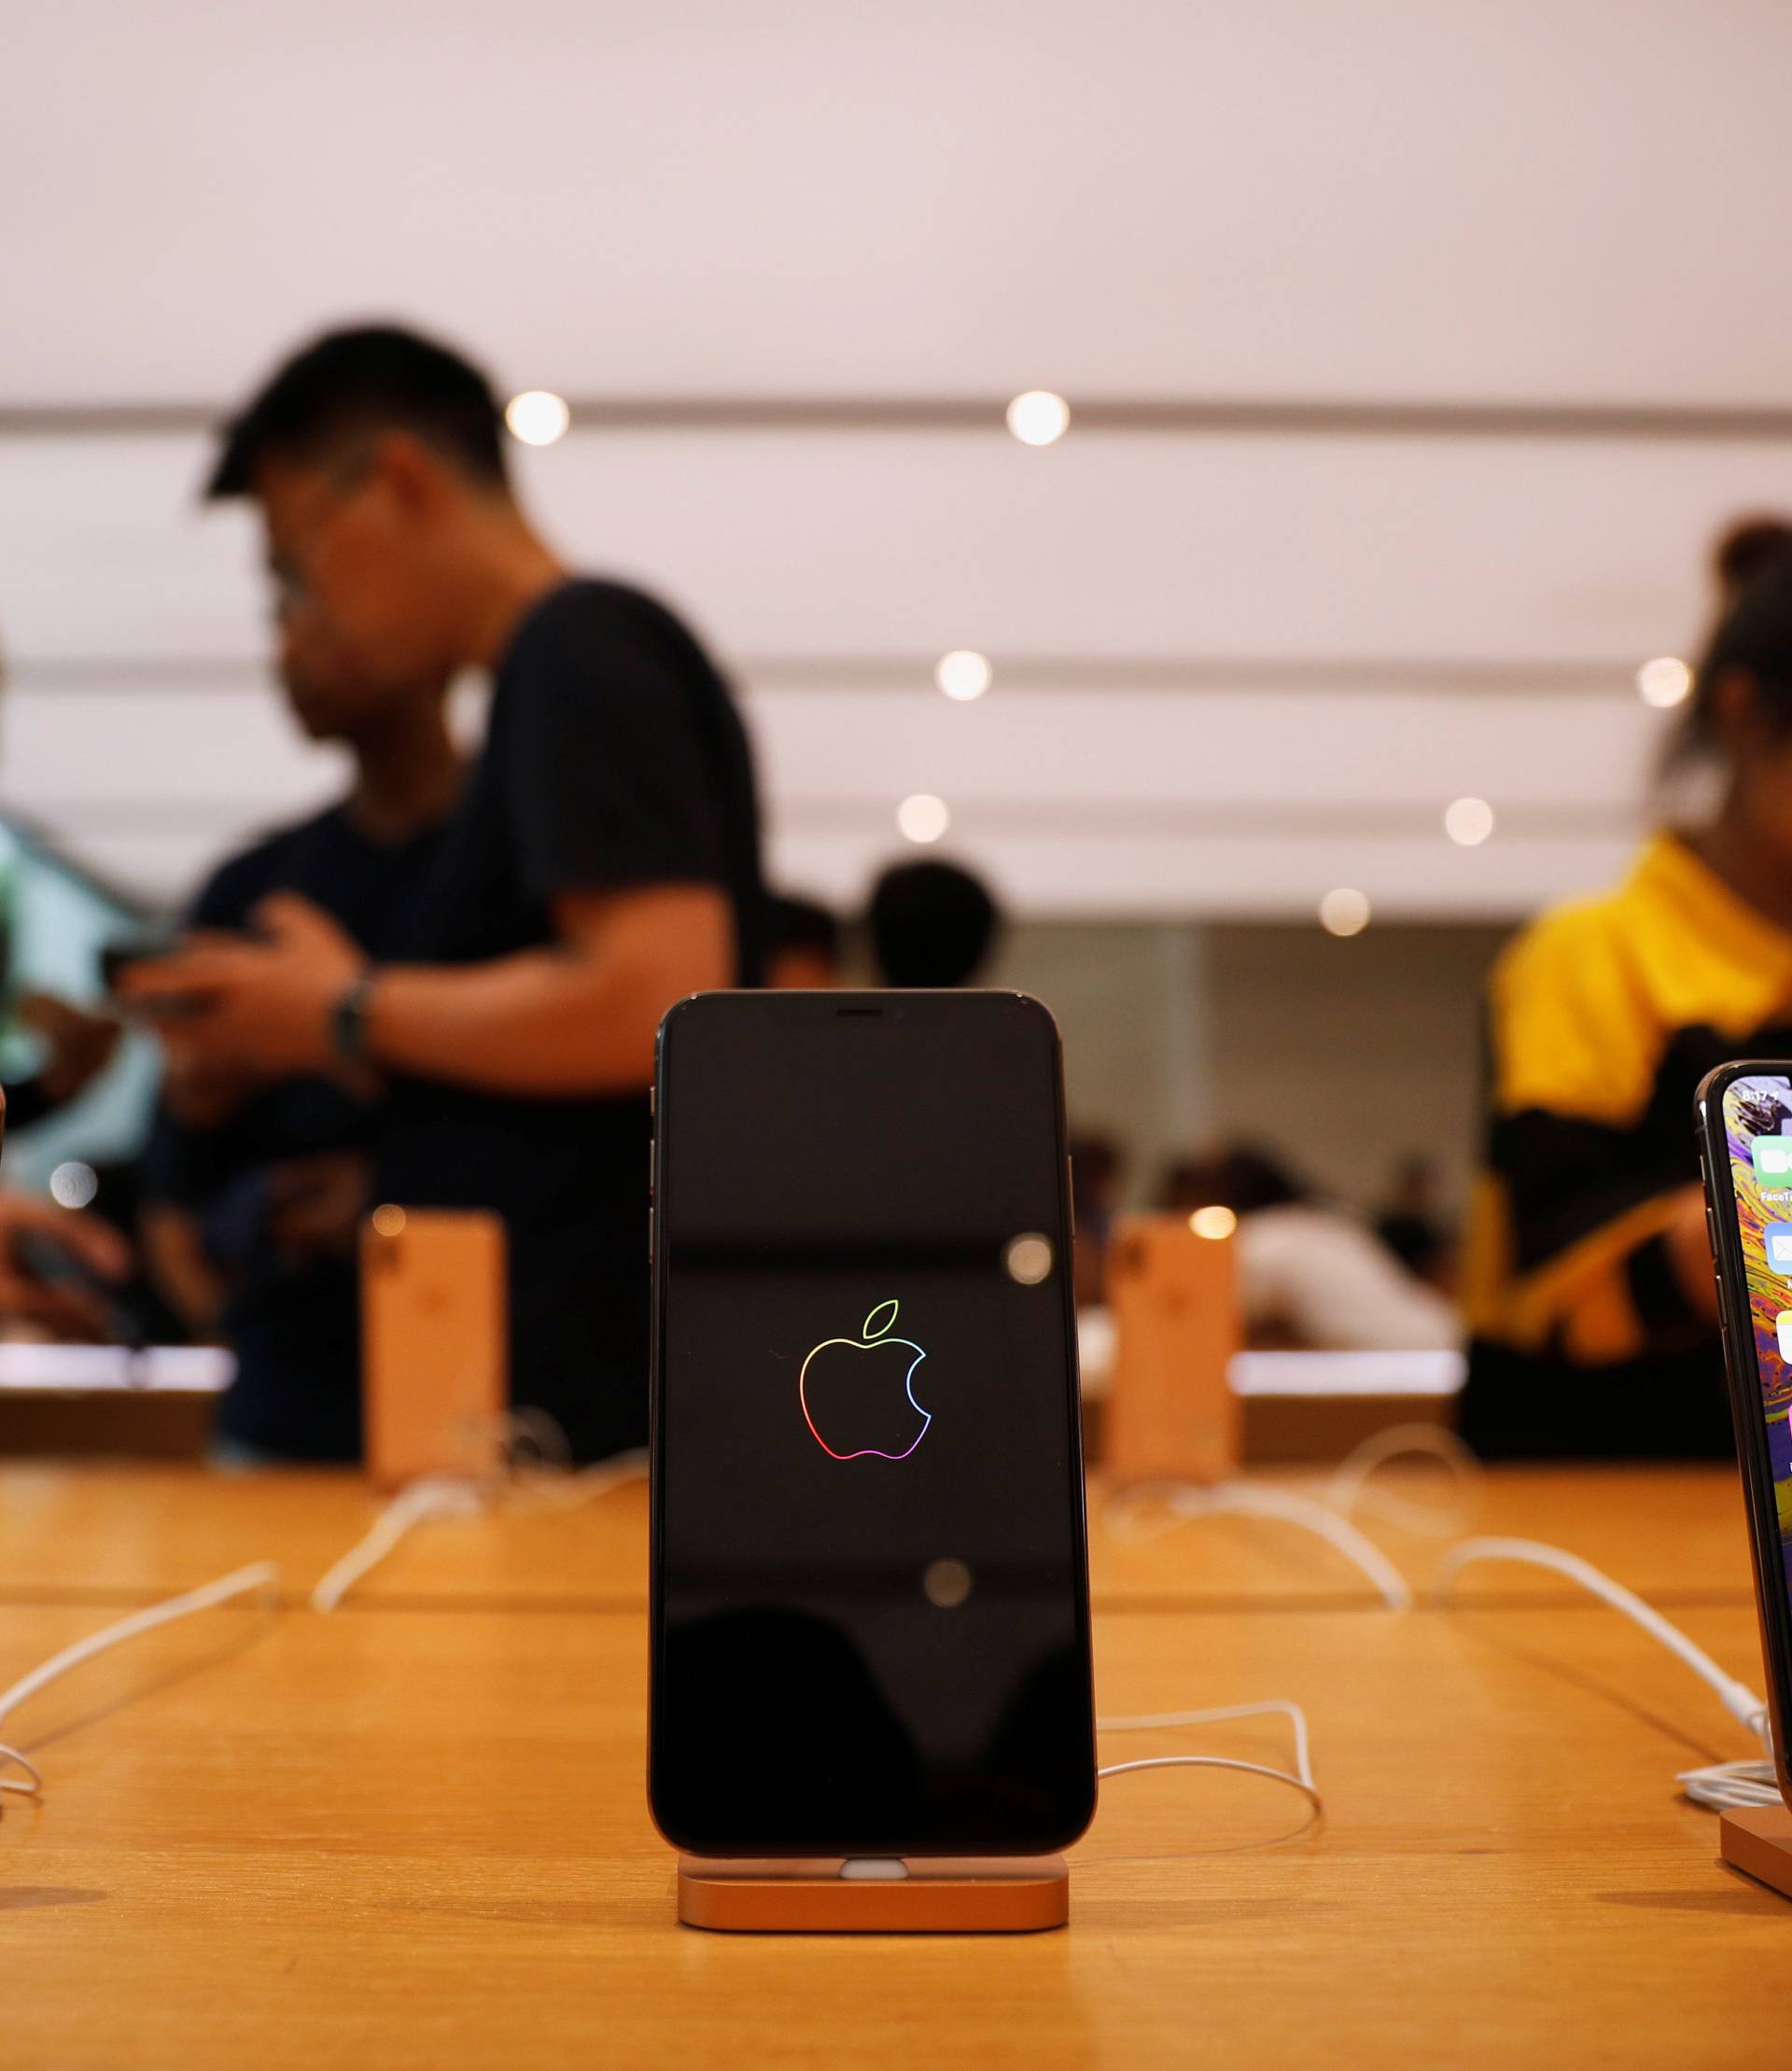 The iPhone XS and iPhone XS Max are displayed at the Apple Store in Singapore